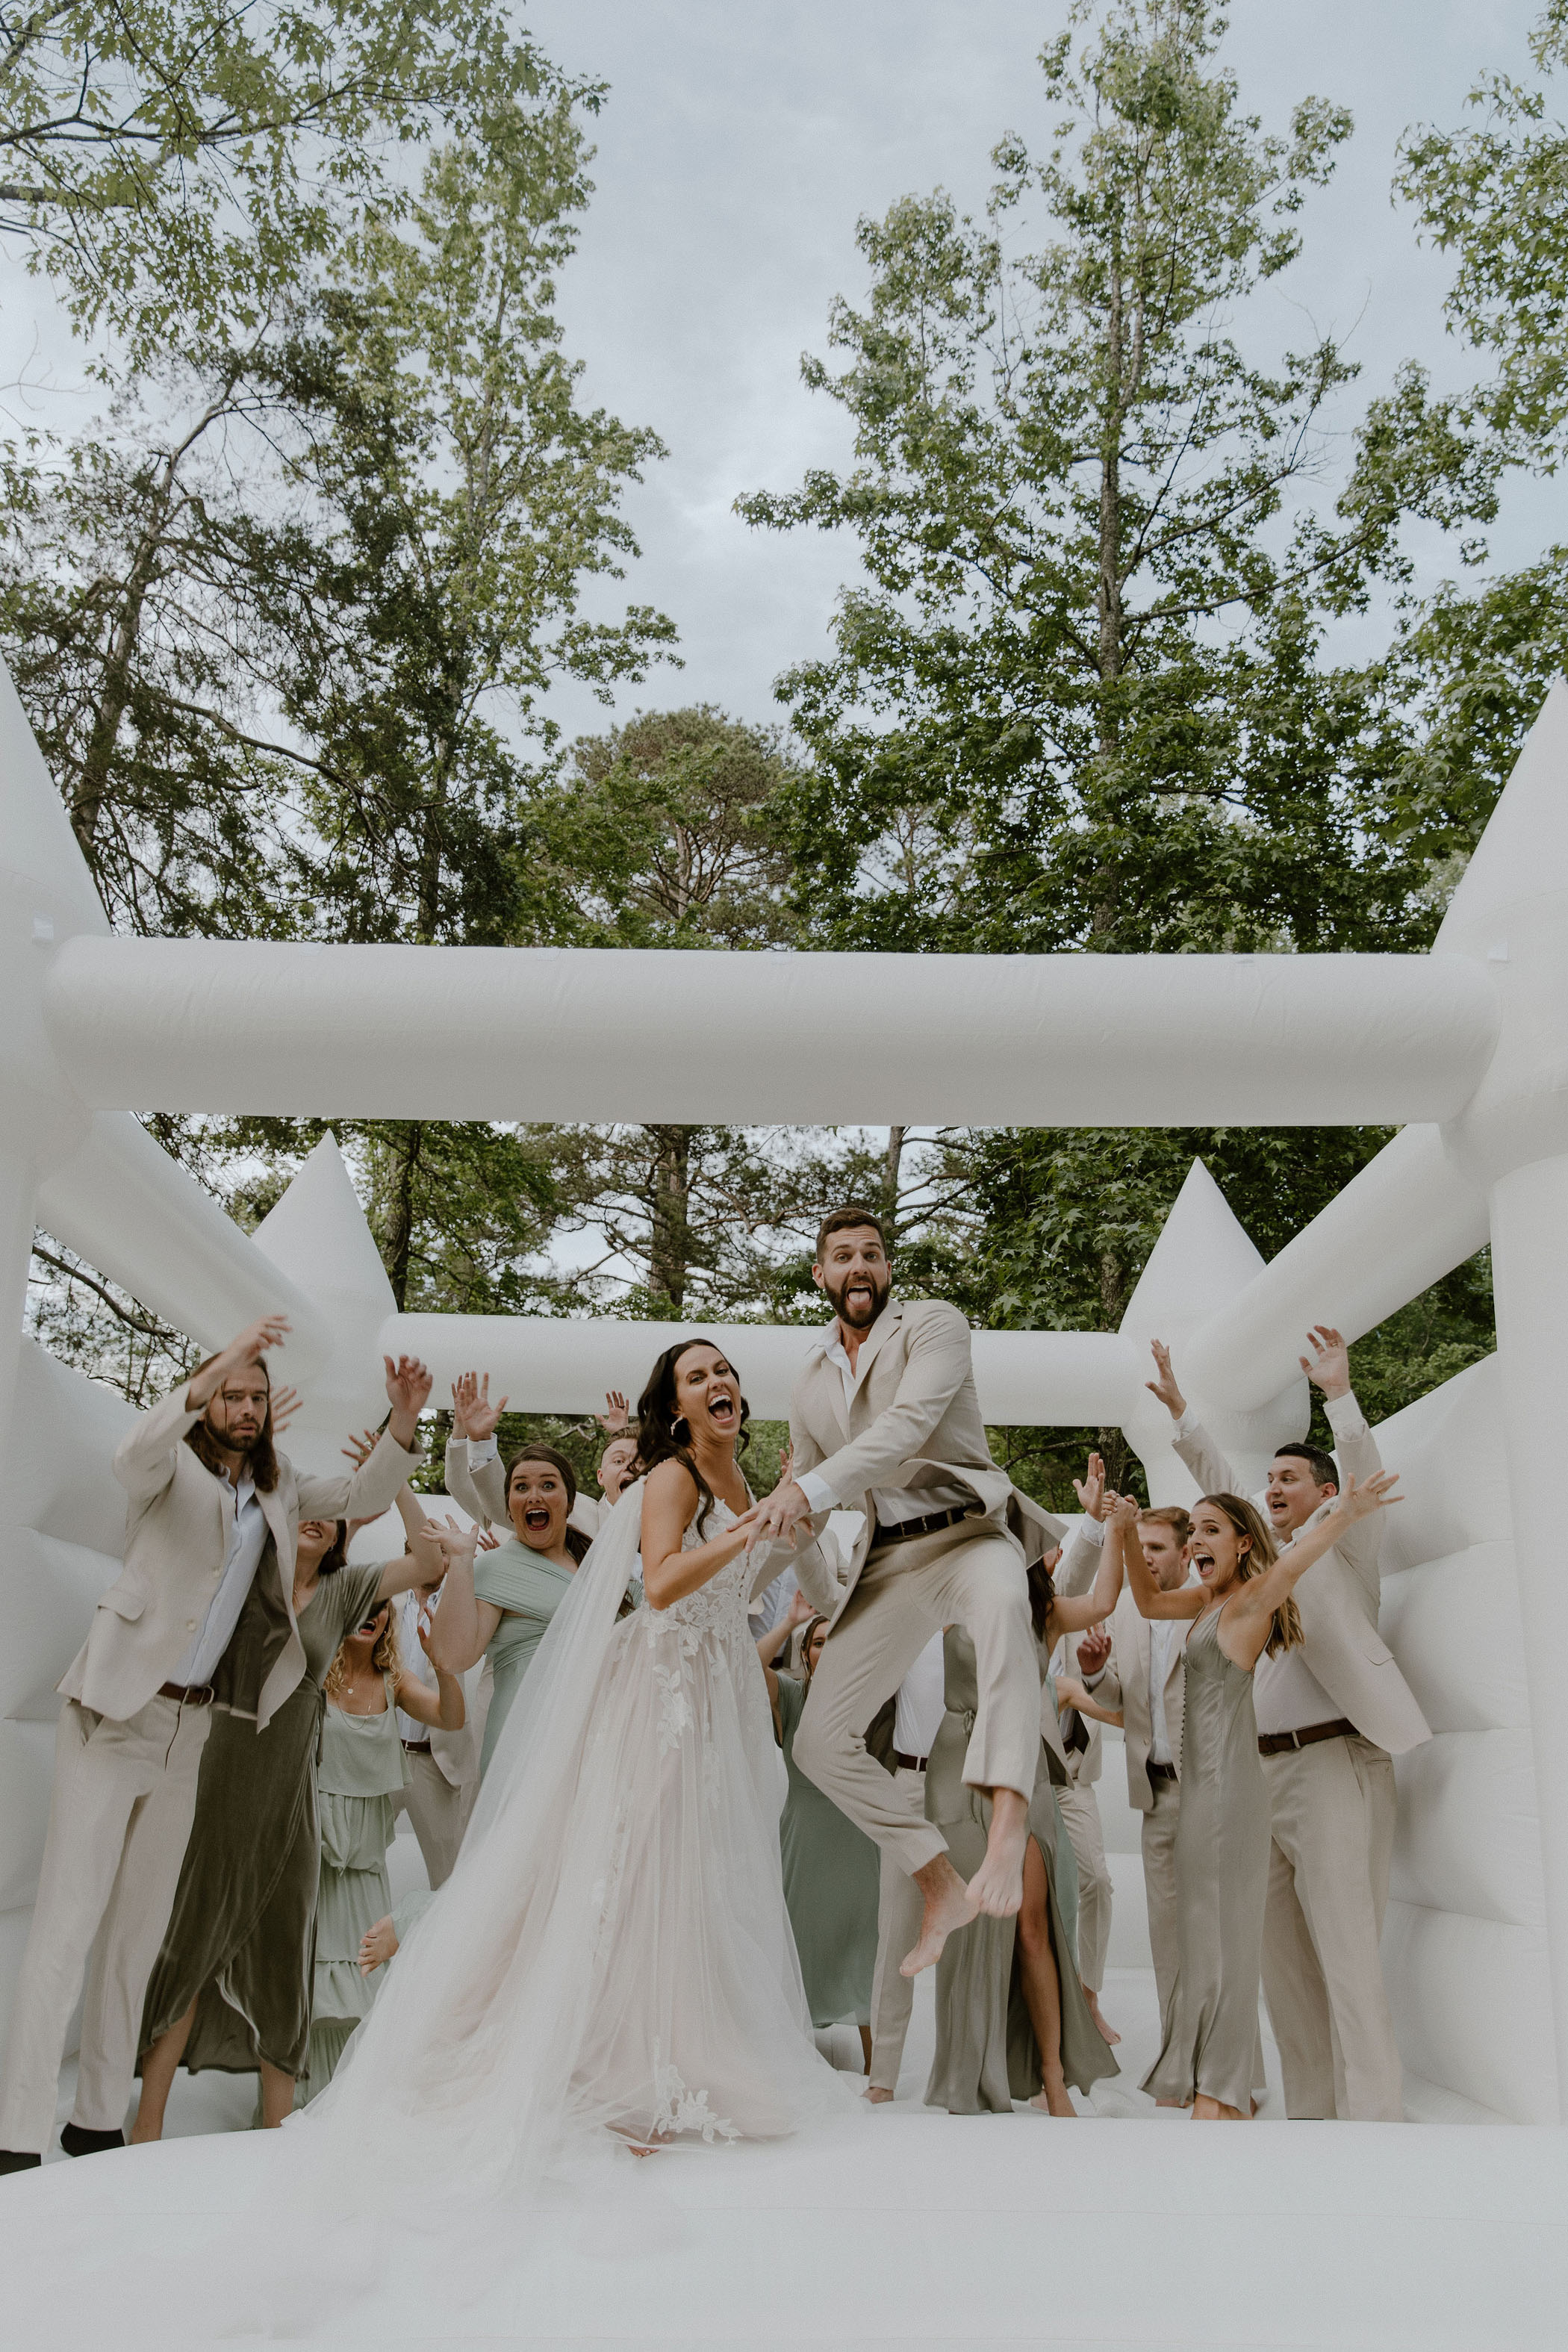 What’s Better Than a Wedding in a Forest? A Wedding With a Bounce House, Of Course!